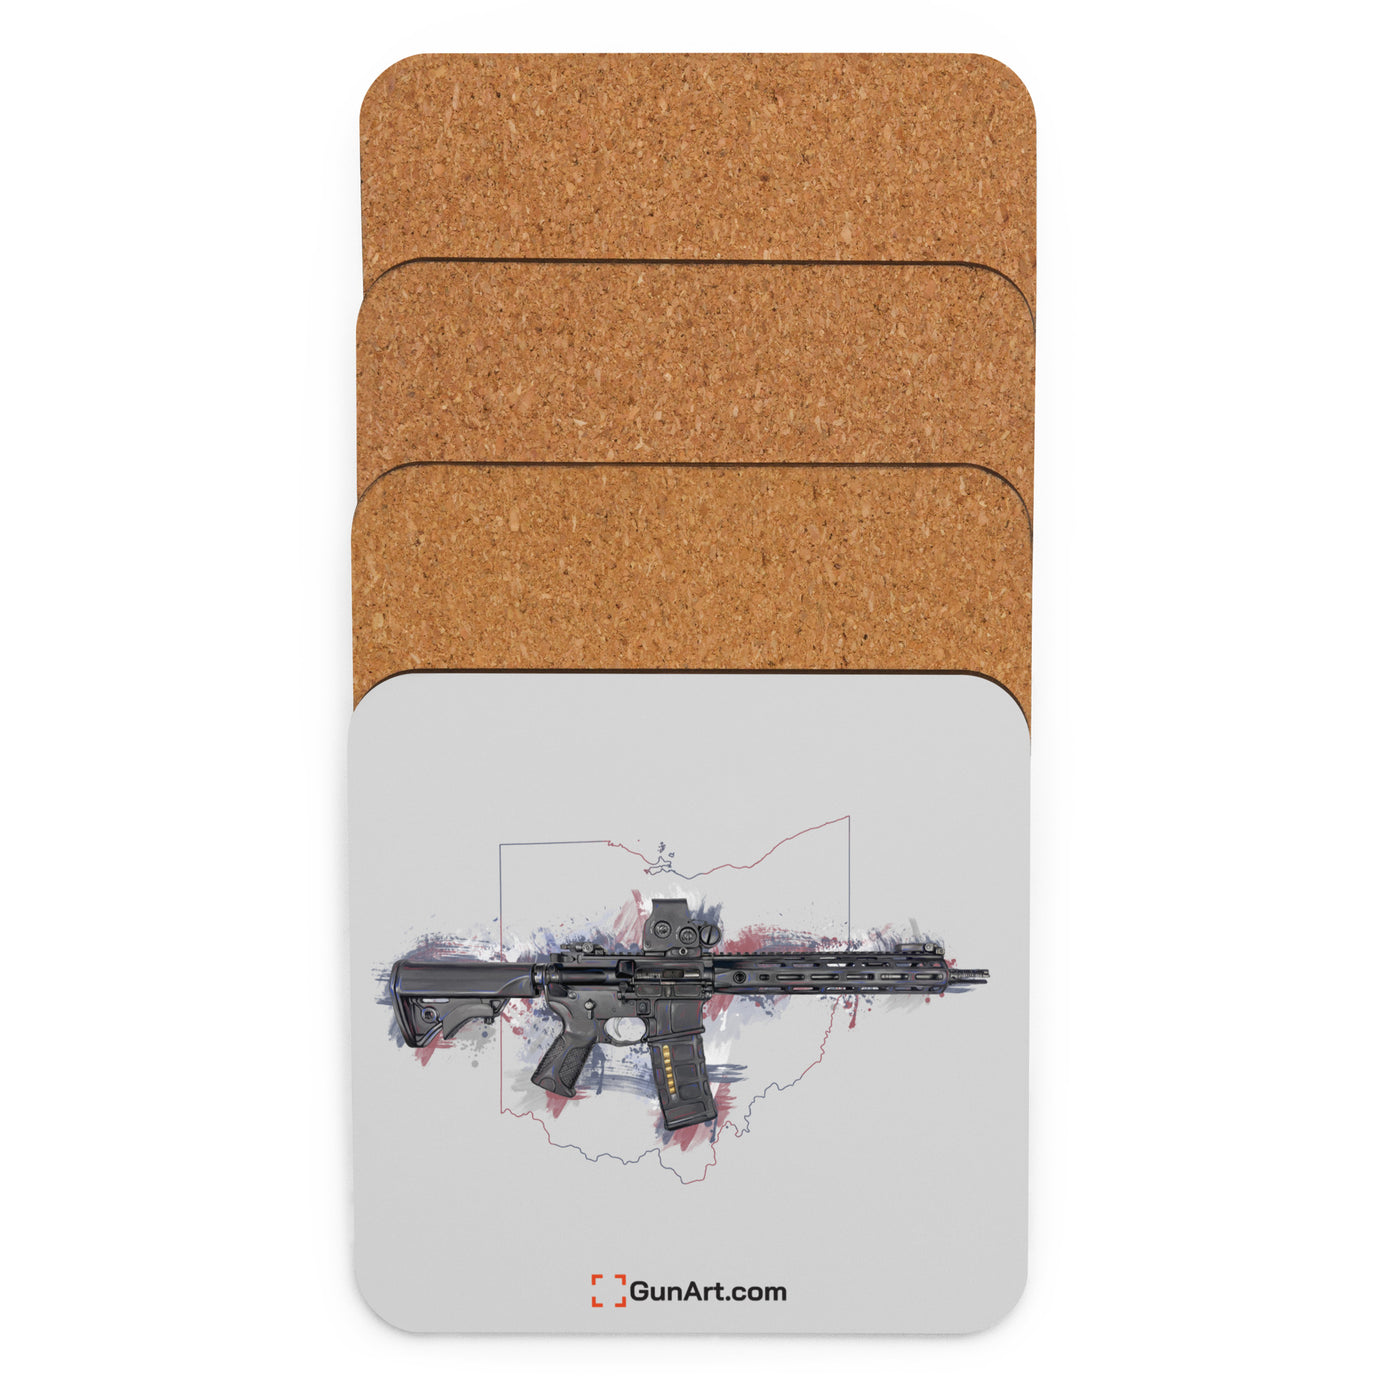 Defending Freedom - Ohio - AR-15 State Cork-back Coaster - Colored State